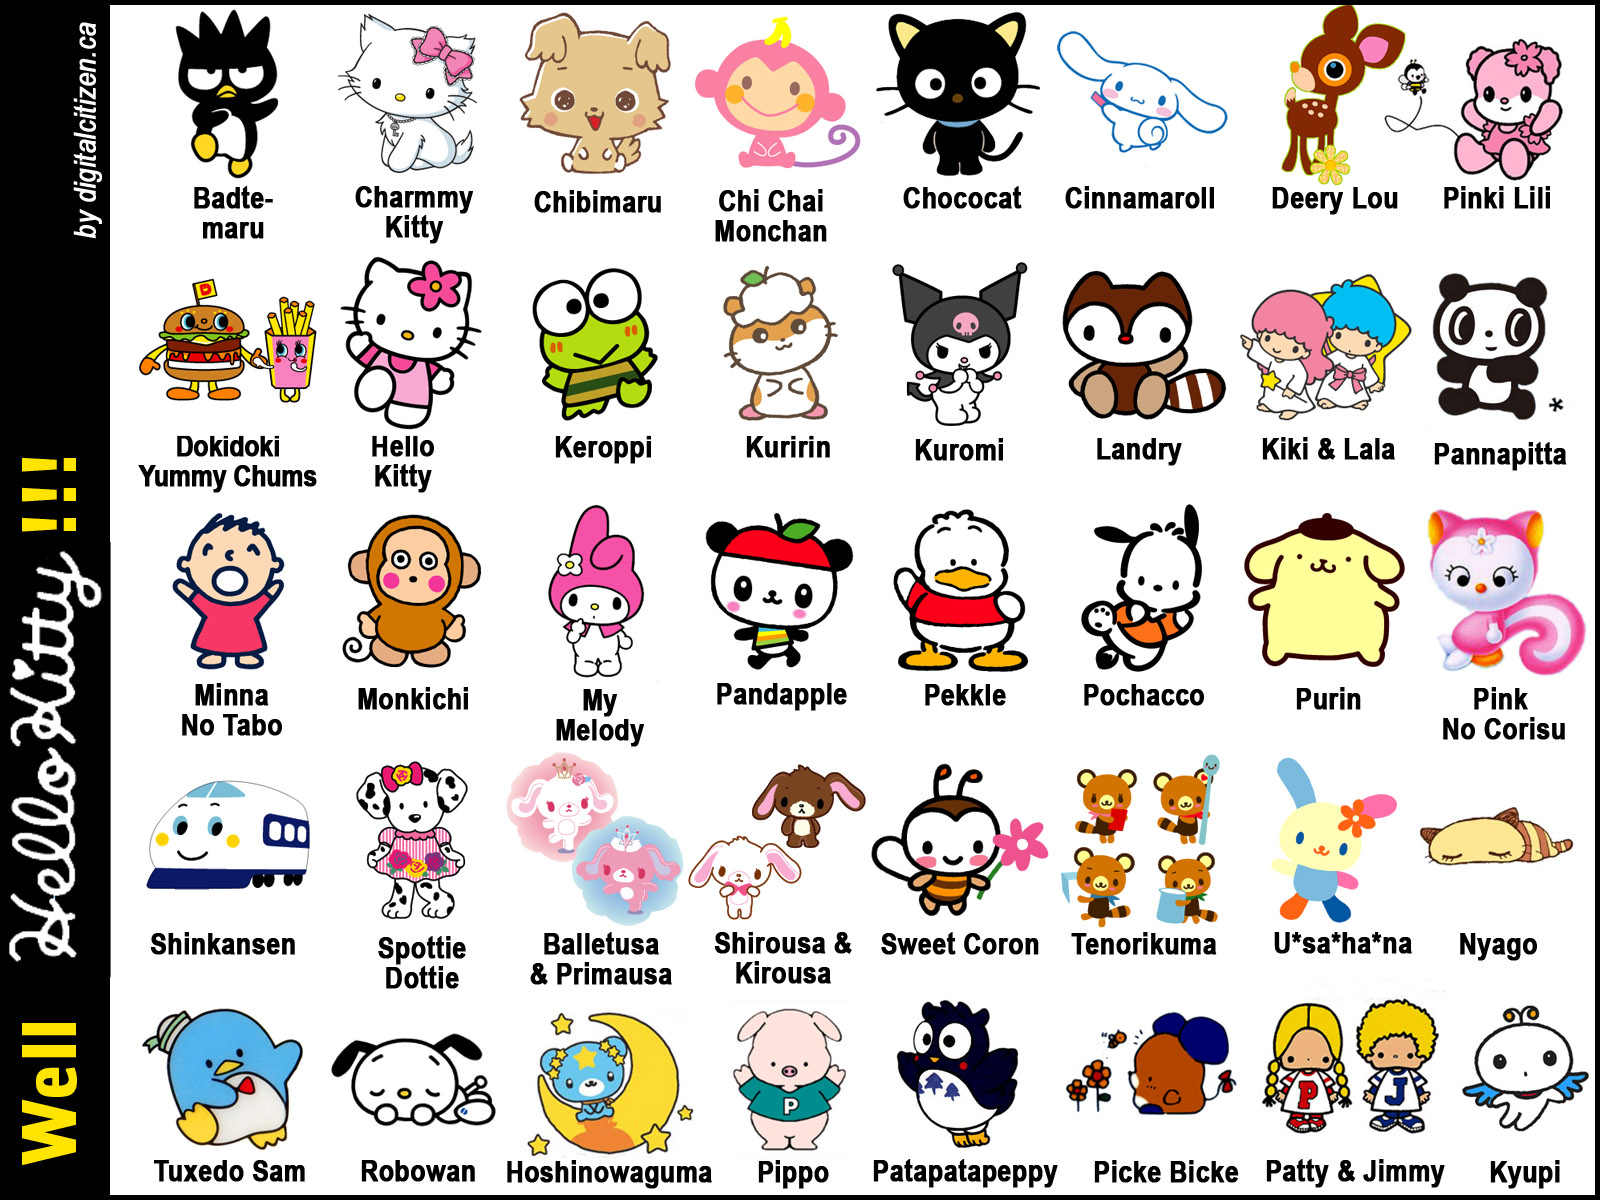 List of sanrio characters